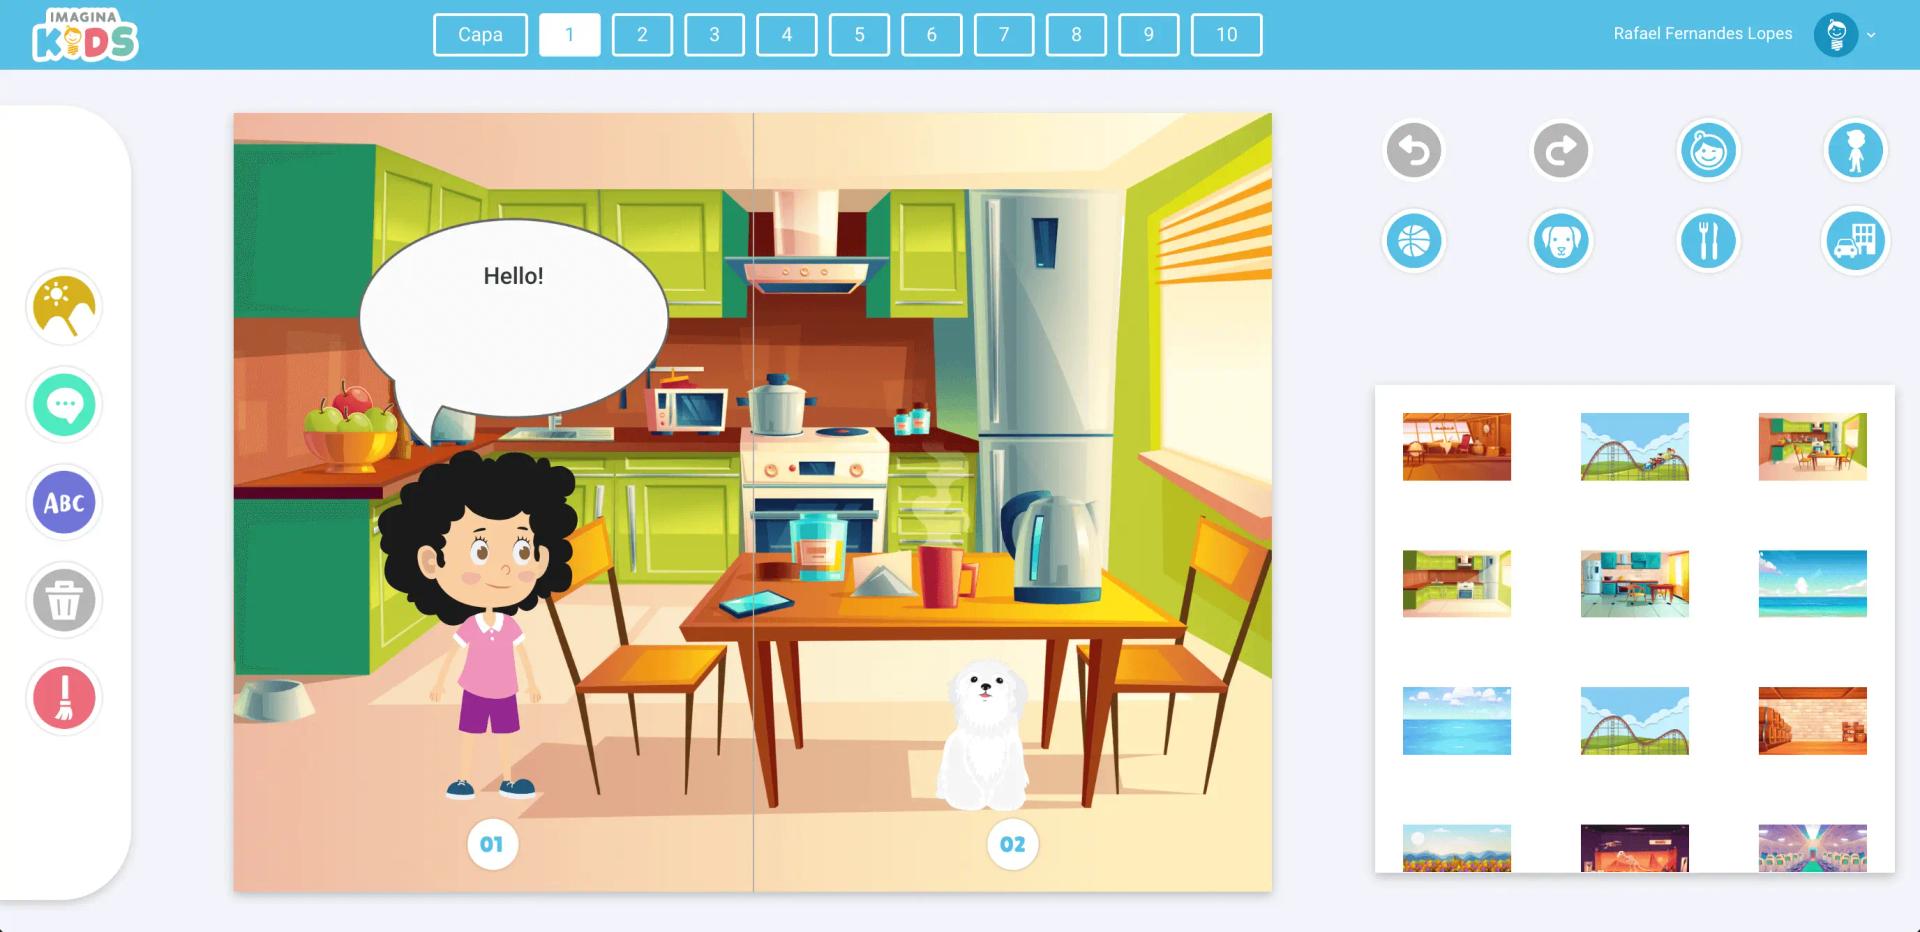 ImaginaWeb story page with a kitchen scenario, a white dog and a girl saying 'Hello'